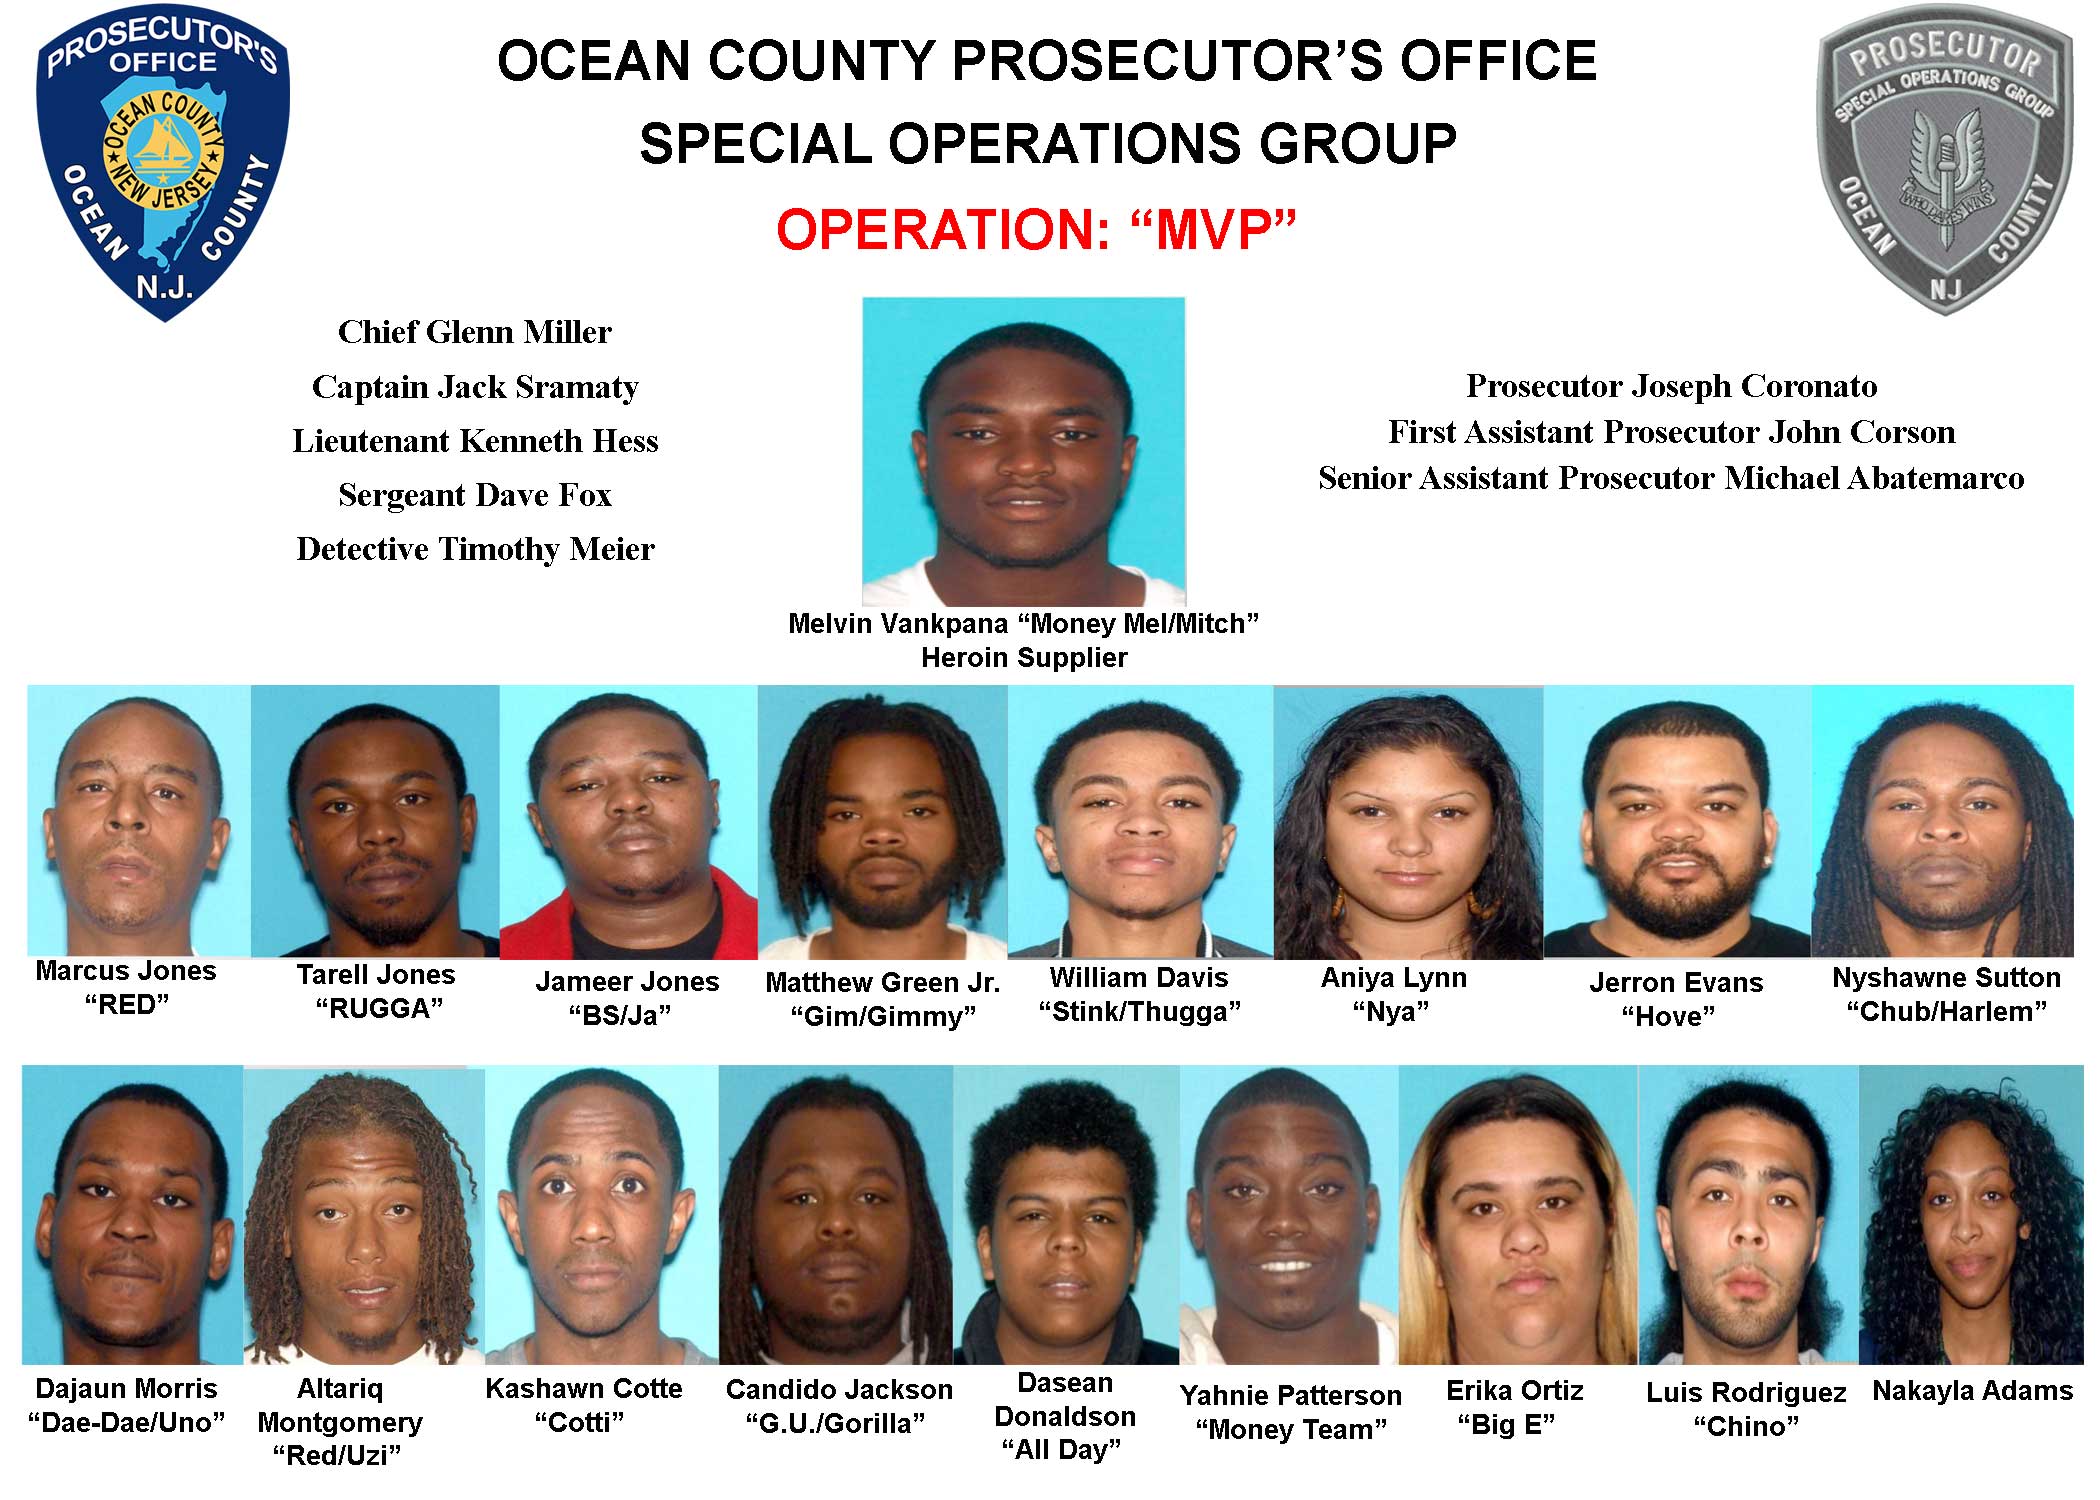 Suspects arrested in 'Operation MVP' by the Ocean County Prosecutor's Office. (Photo: Ocean County Prosecutor's Office)